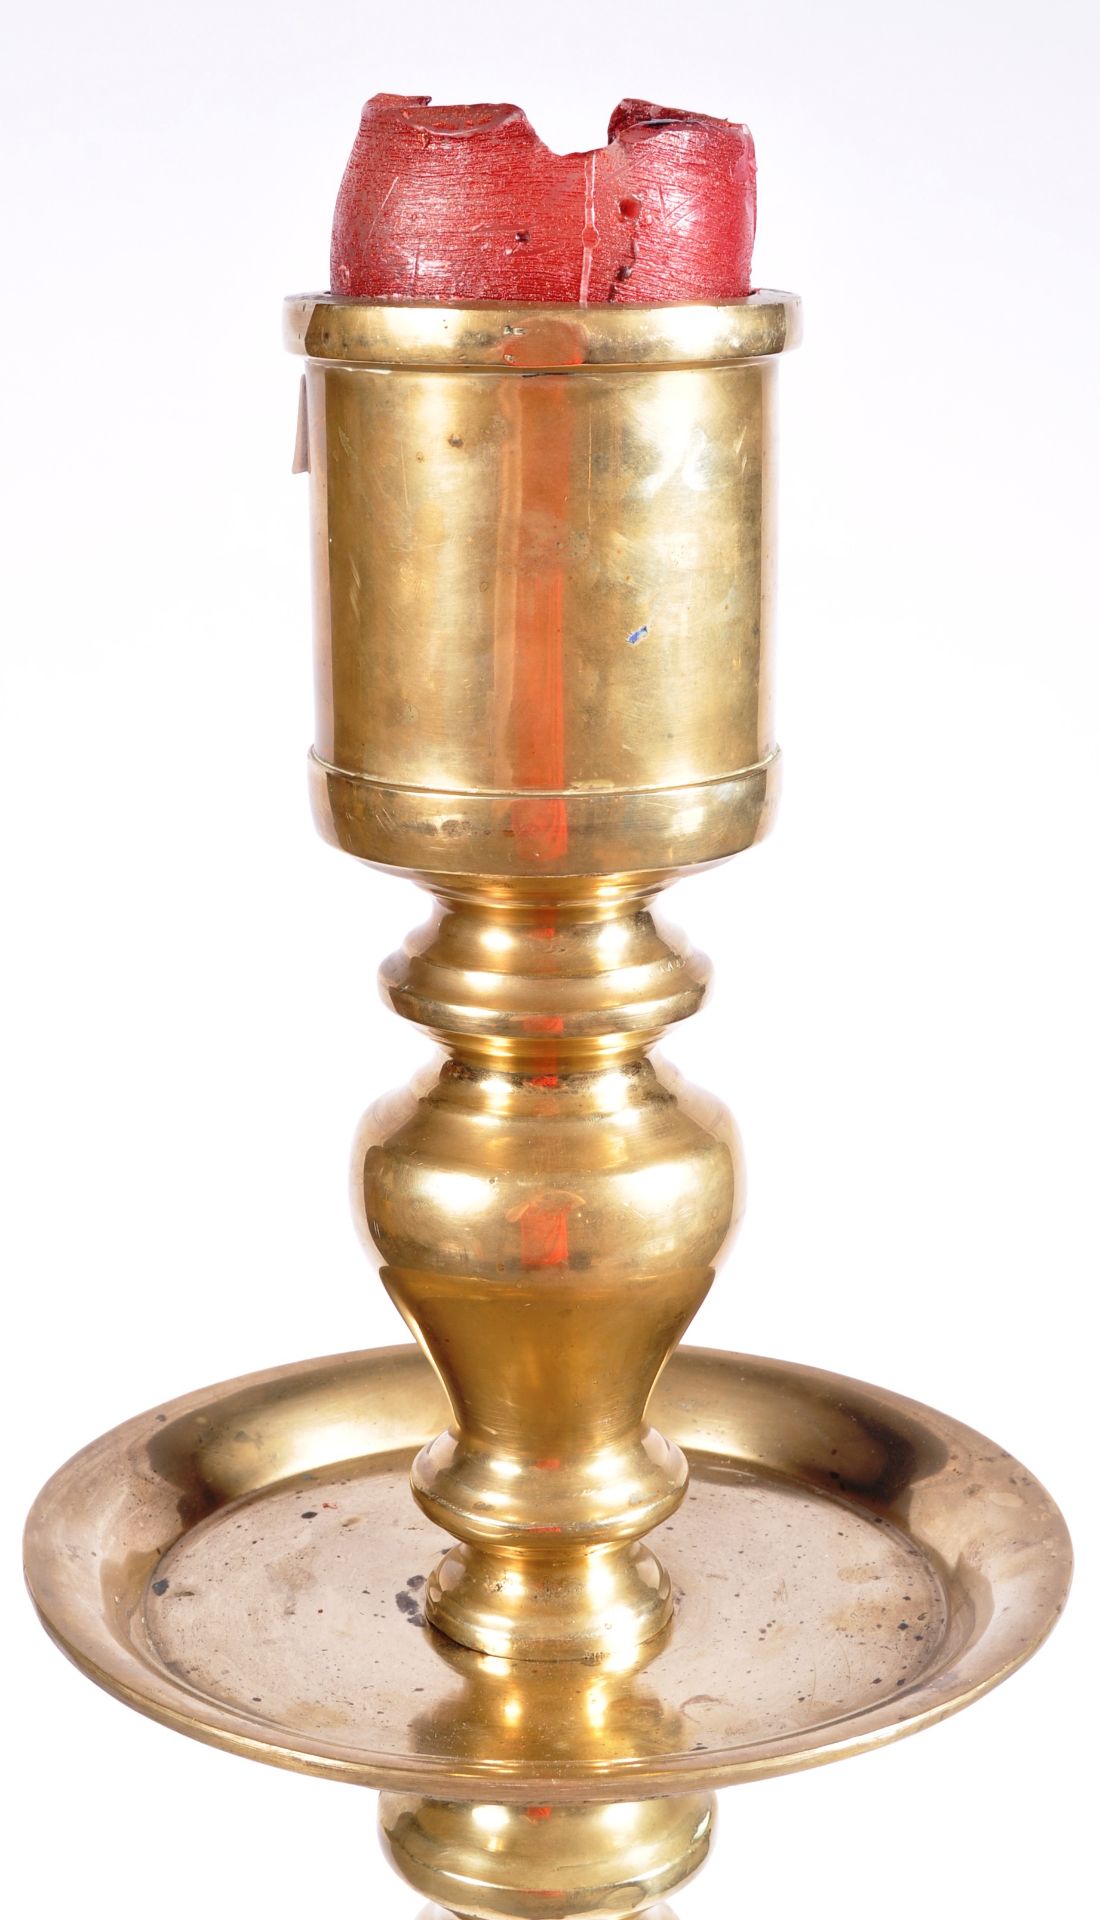 LARGE HEAVY FLOOR STANDING DUTCH CANDLESTICK - Image 3 of 7